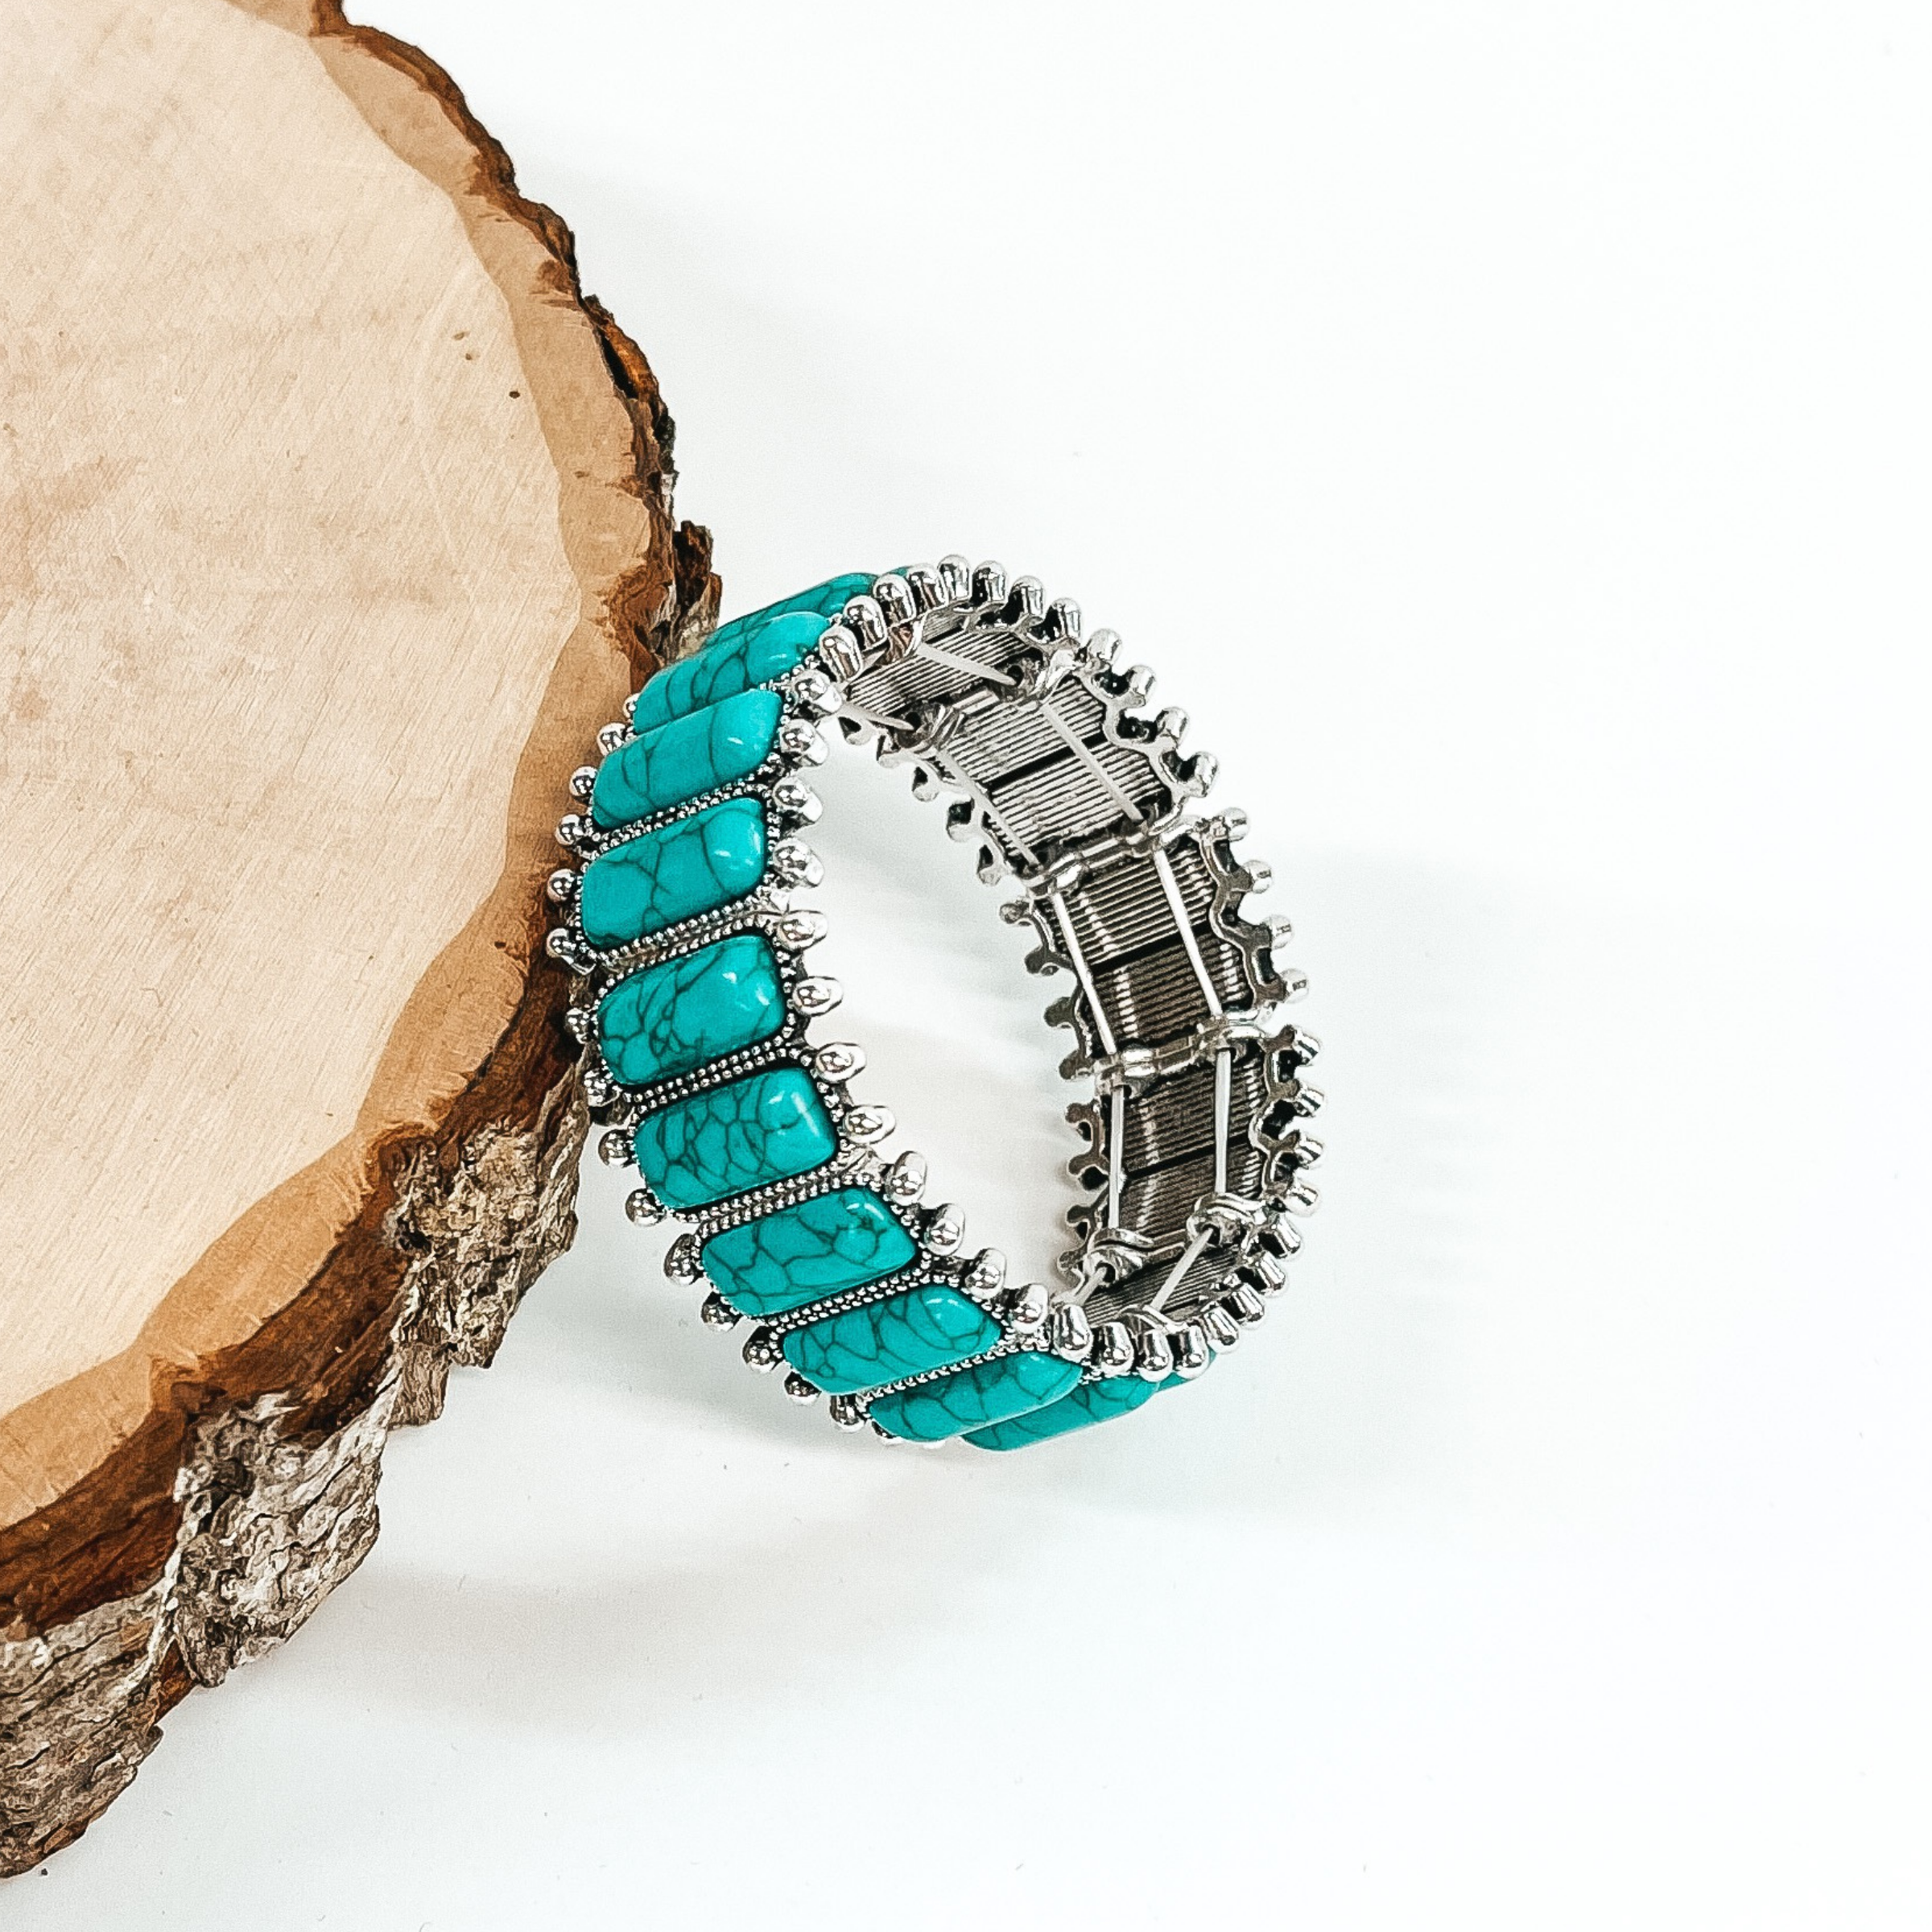 Stretchy bracelet with rectangle, turquoise stone that have a silver outline. This bracelet is pictured laying against a piece of wood on a white background. 